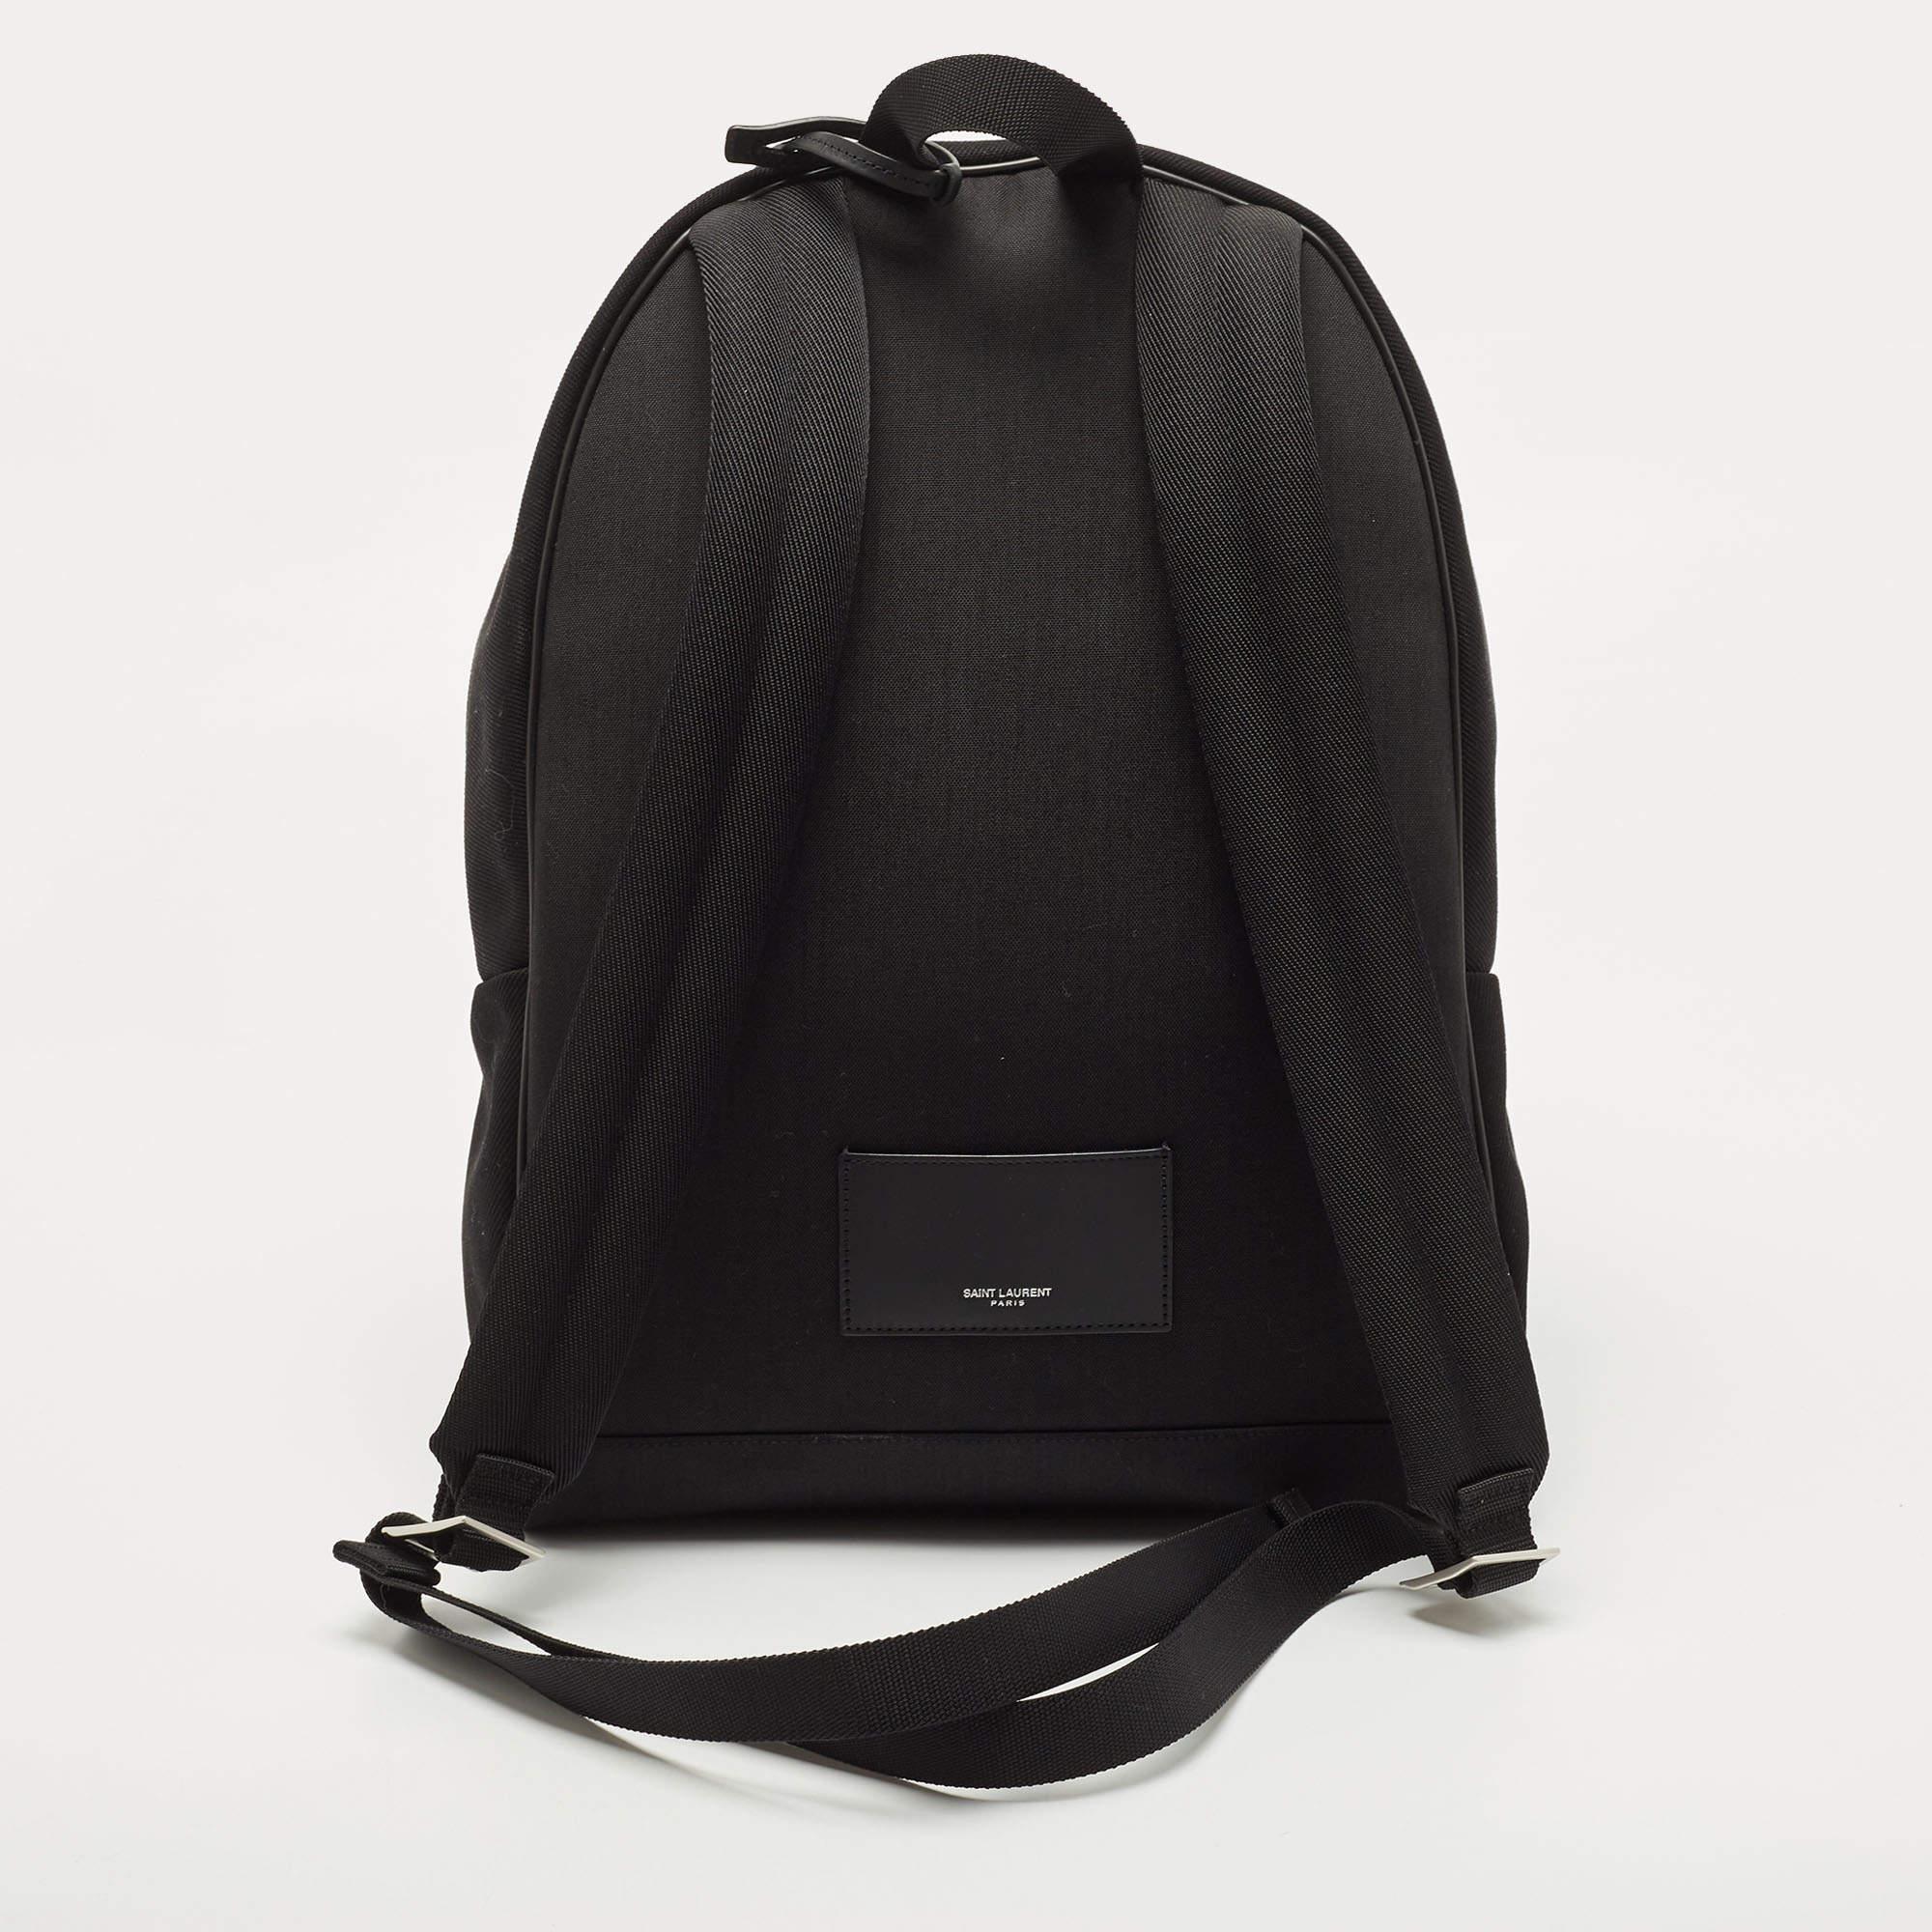 This practical and fashionable Saint Laurent backpack will come in handy for daily use or as a style statement. It is smartly designed with a spacious interior for your belongings. Two shoulder straps make it ready to be yours.

Includes: Original